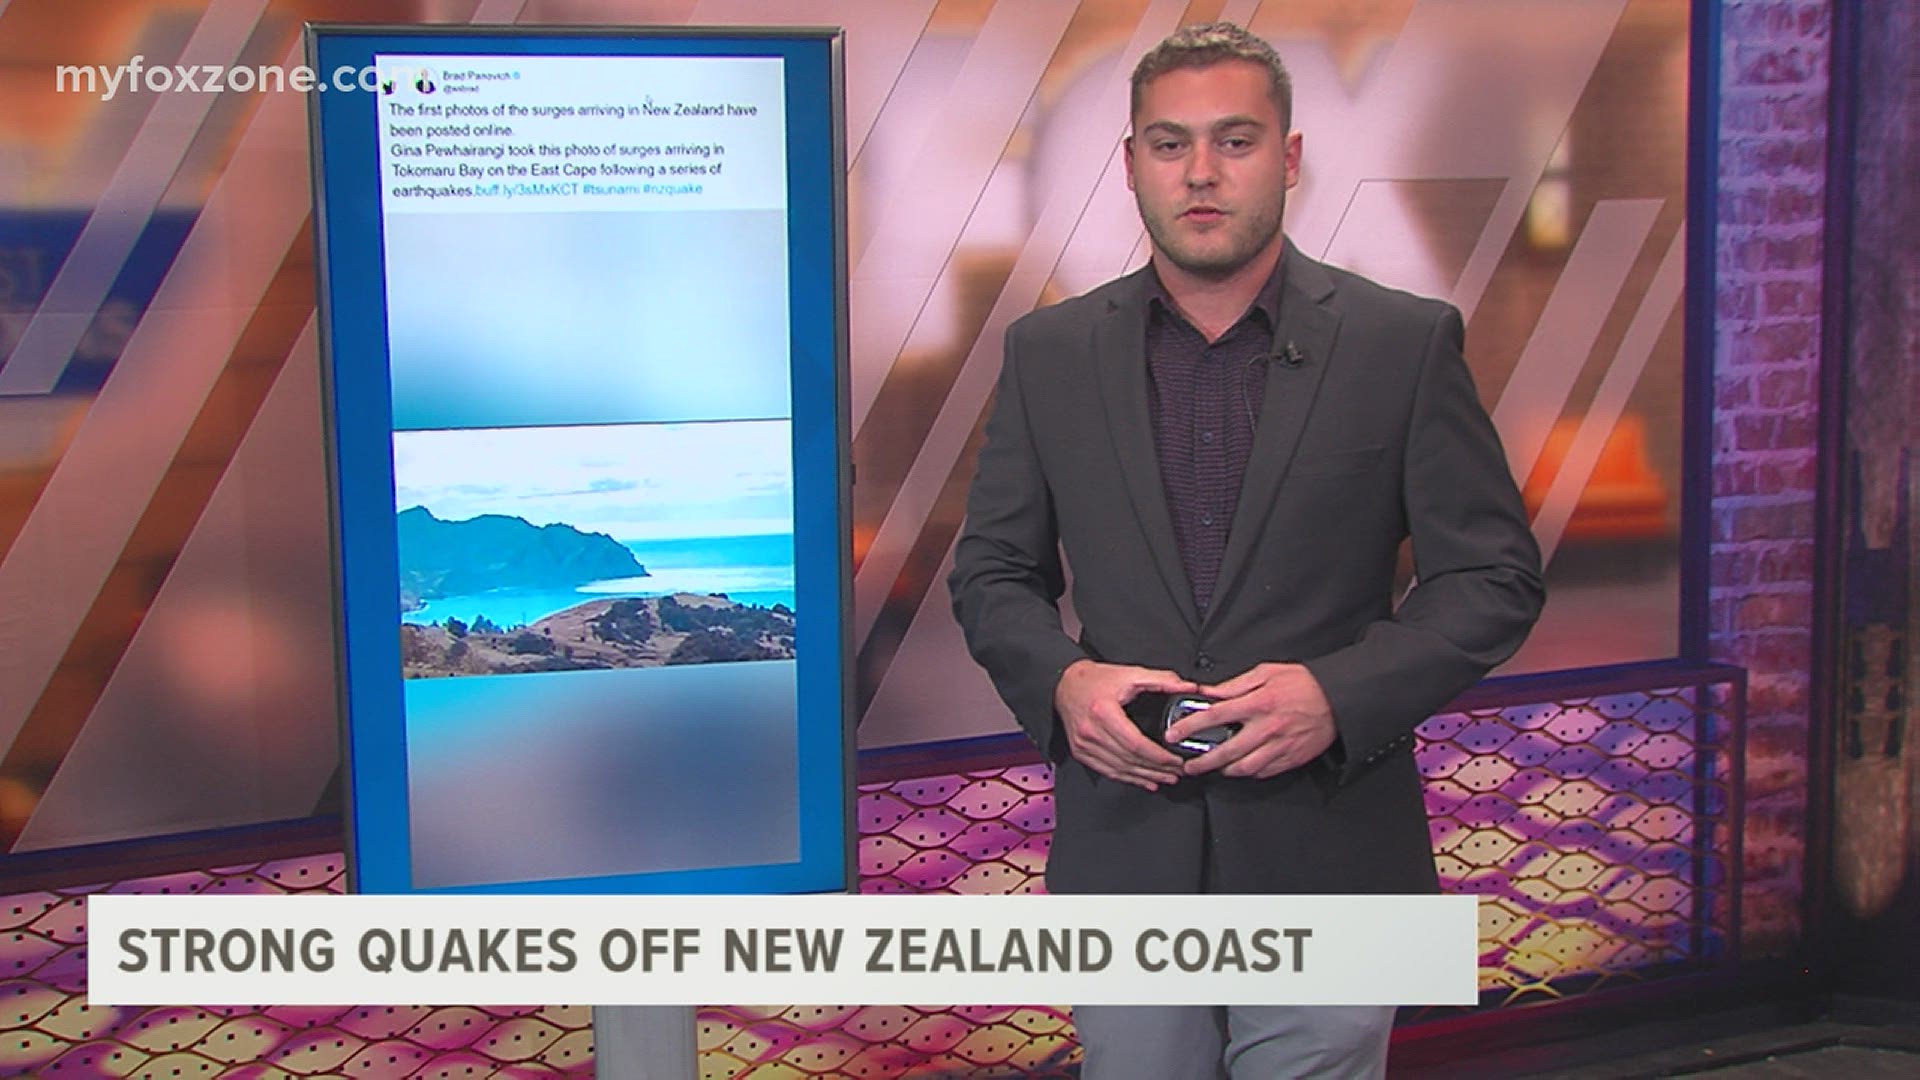 Strong earthquakes north of New Zealand lead to tsunami concerns across the Pacific. Meteorologist Joe DeCarlo has the latest information.